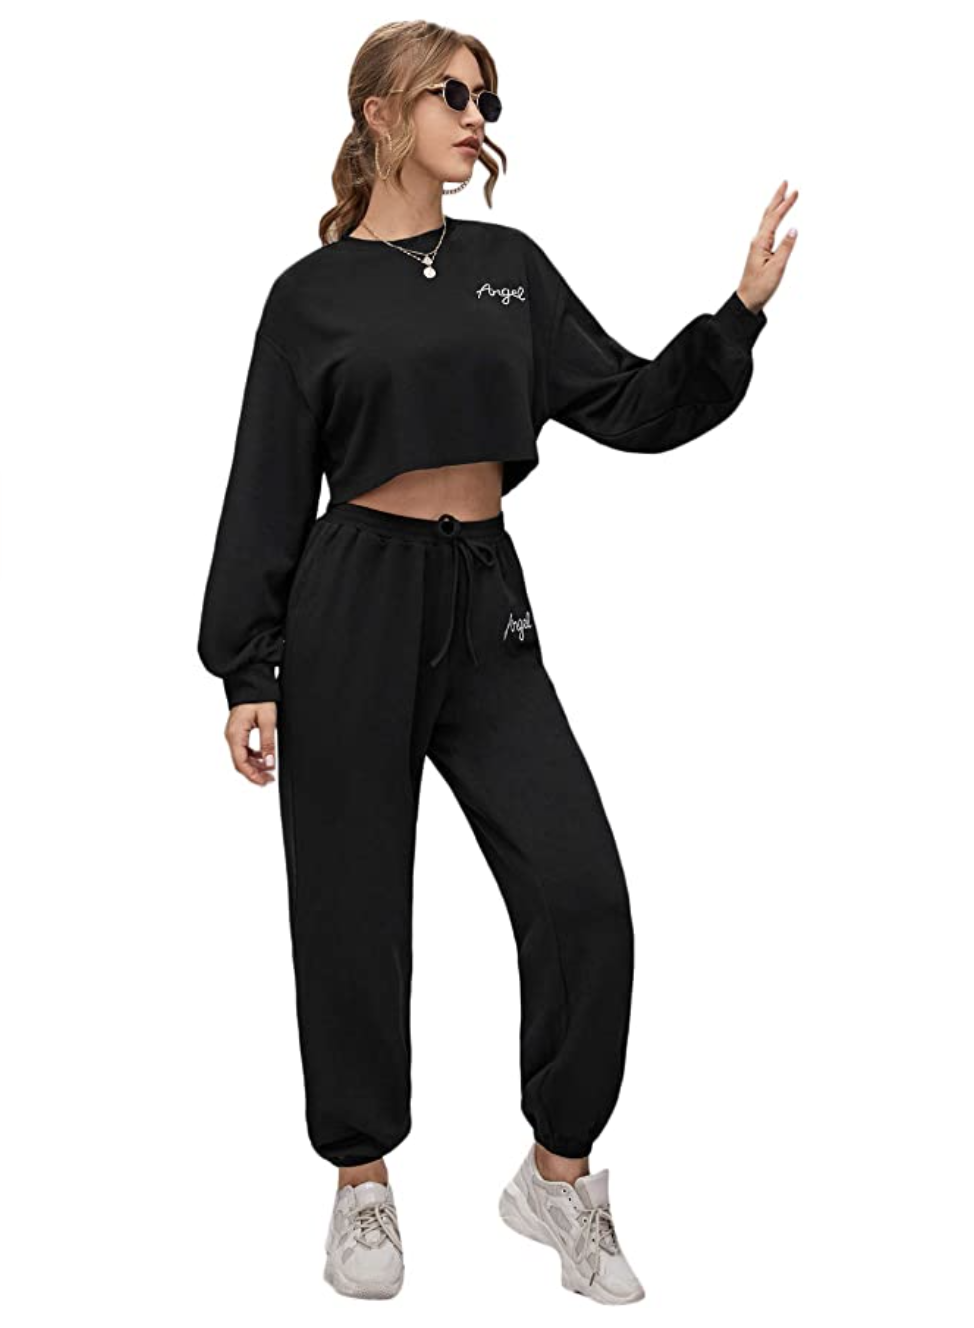 Two Piece Sweat Suits Women Matching Sets Joggers Sweatshirt and